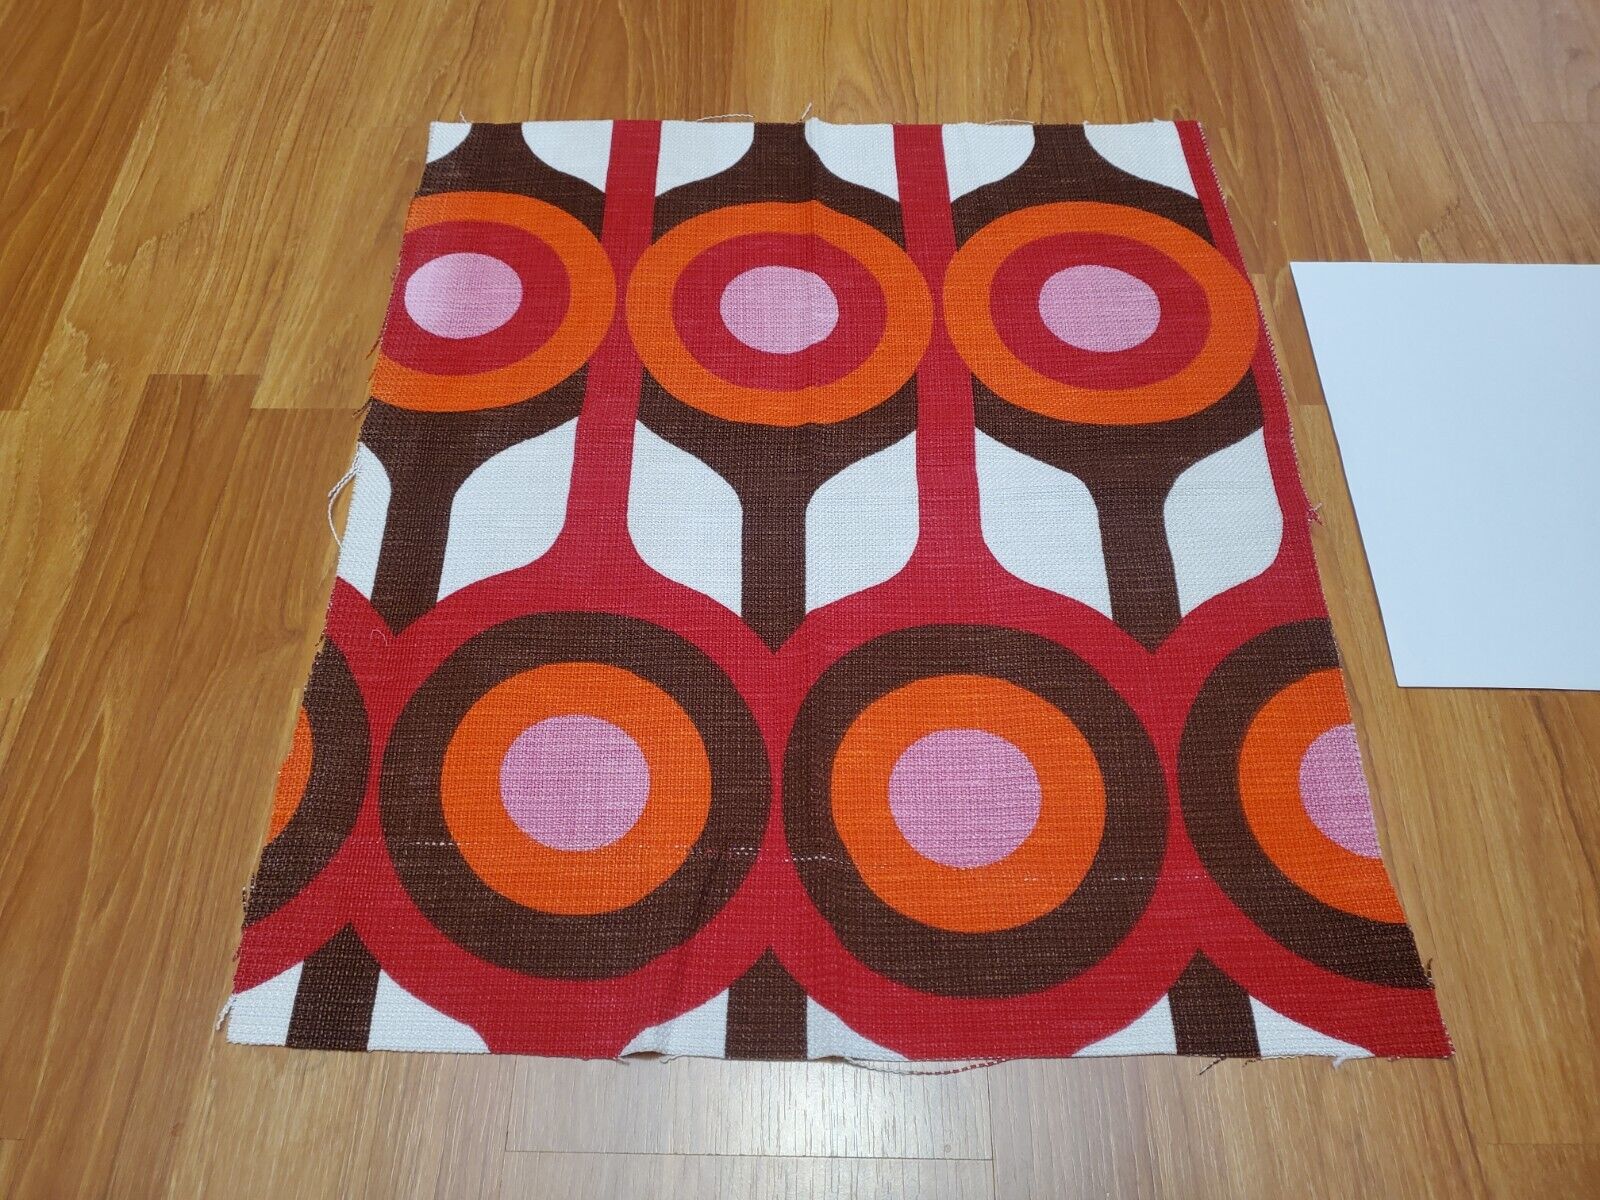 Awesome RARE Vintage Mid Century retro 70s red pink brn targets fabric LOOK 